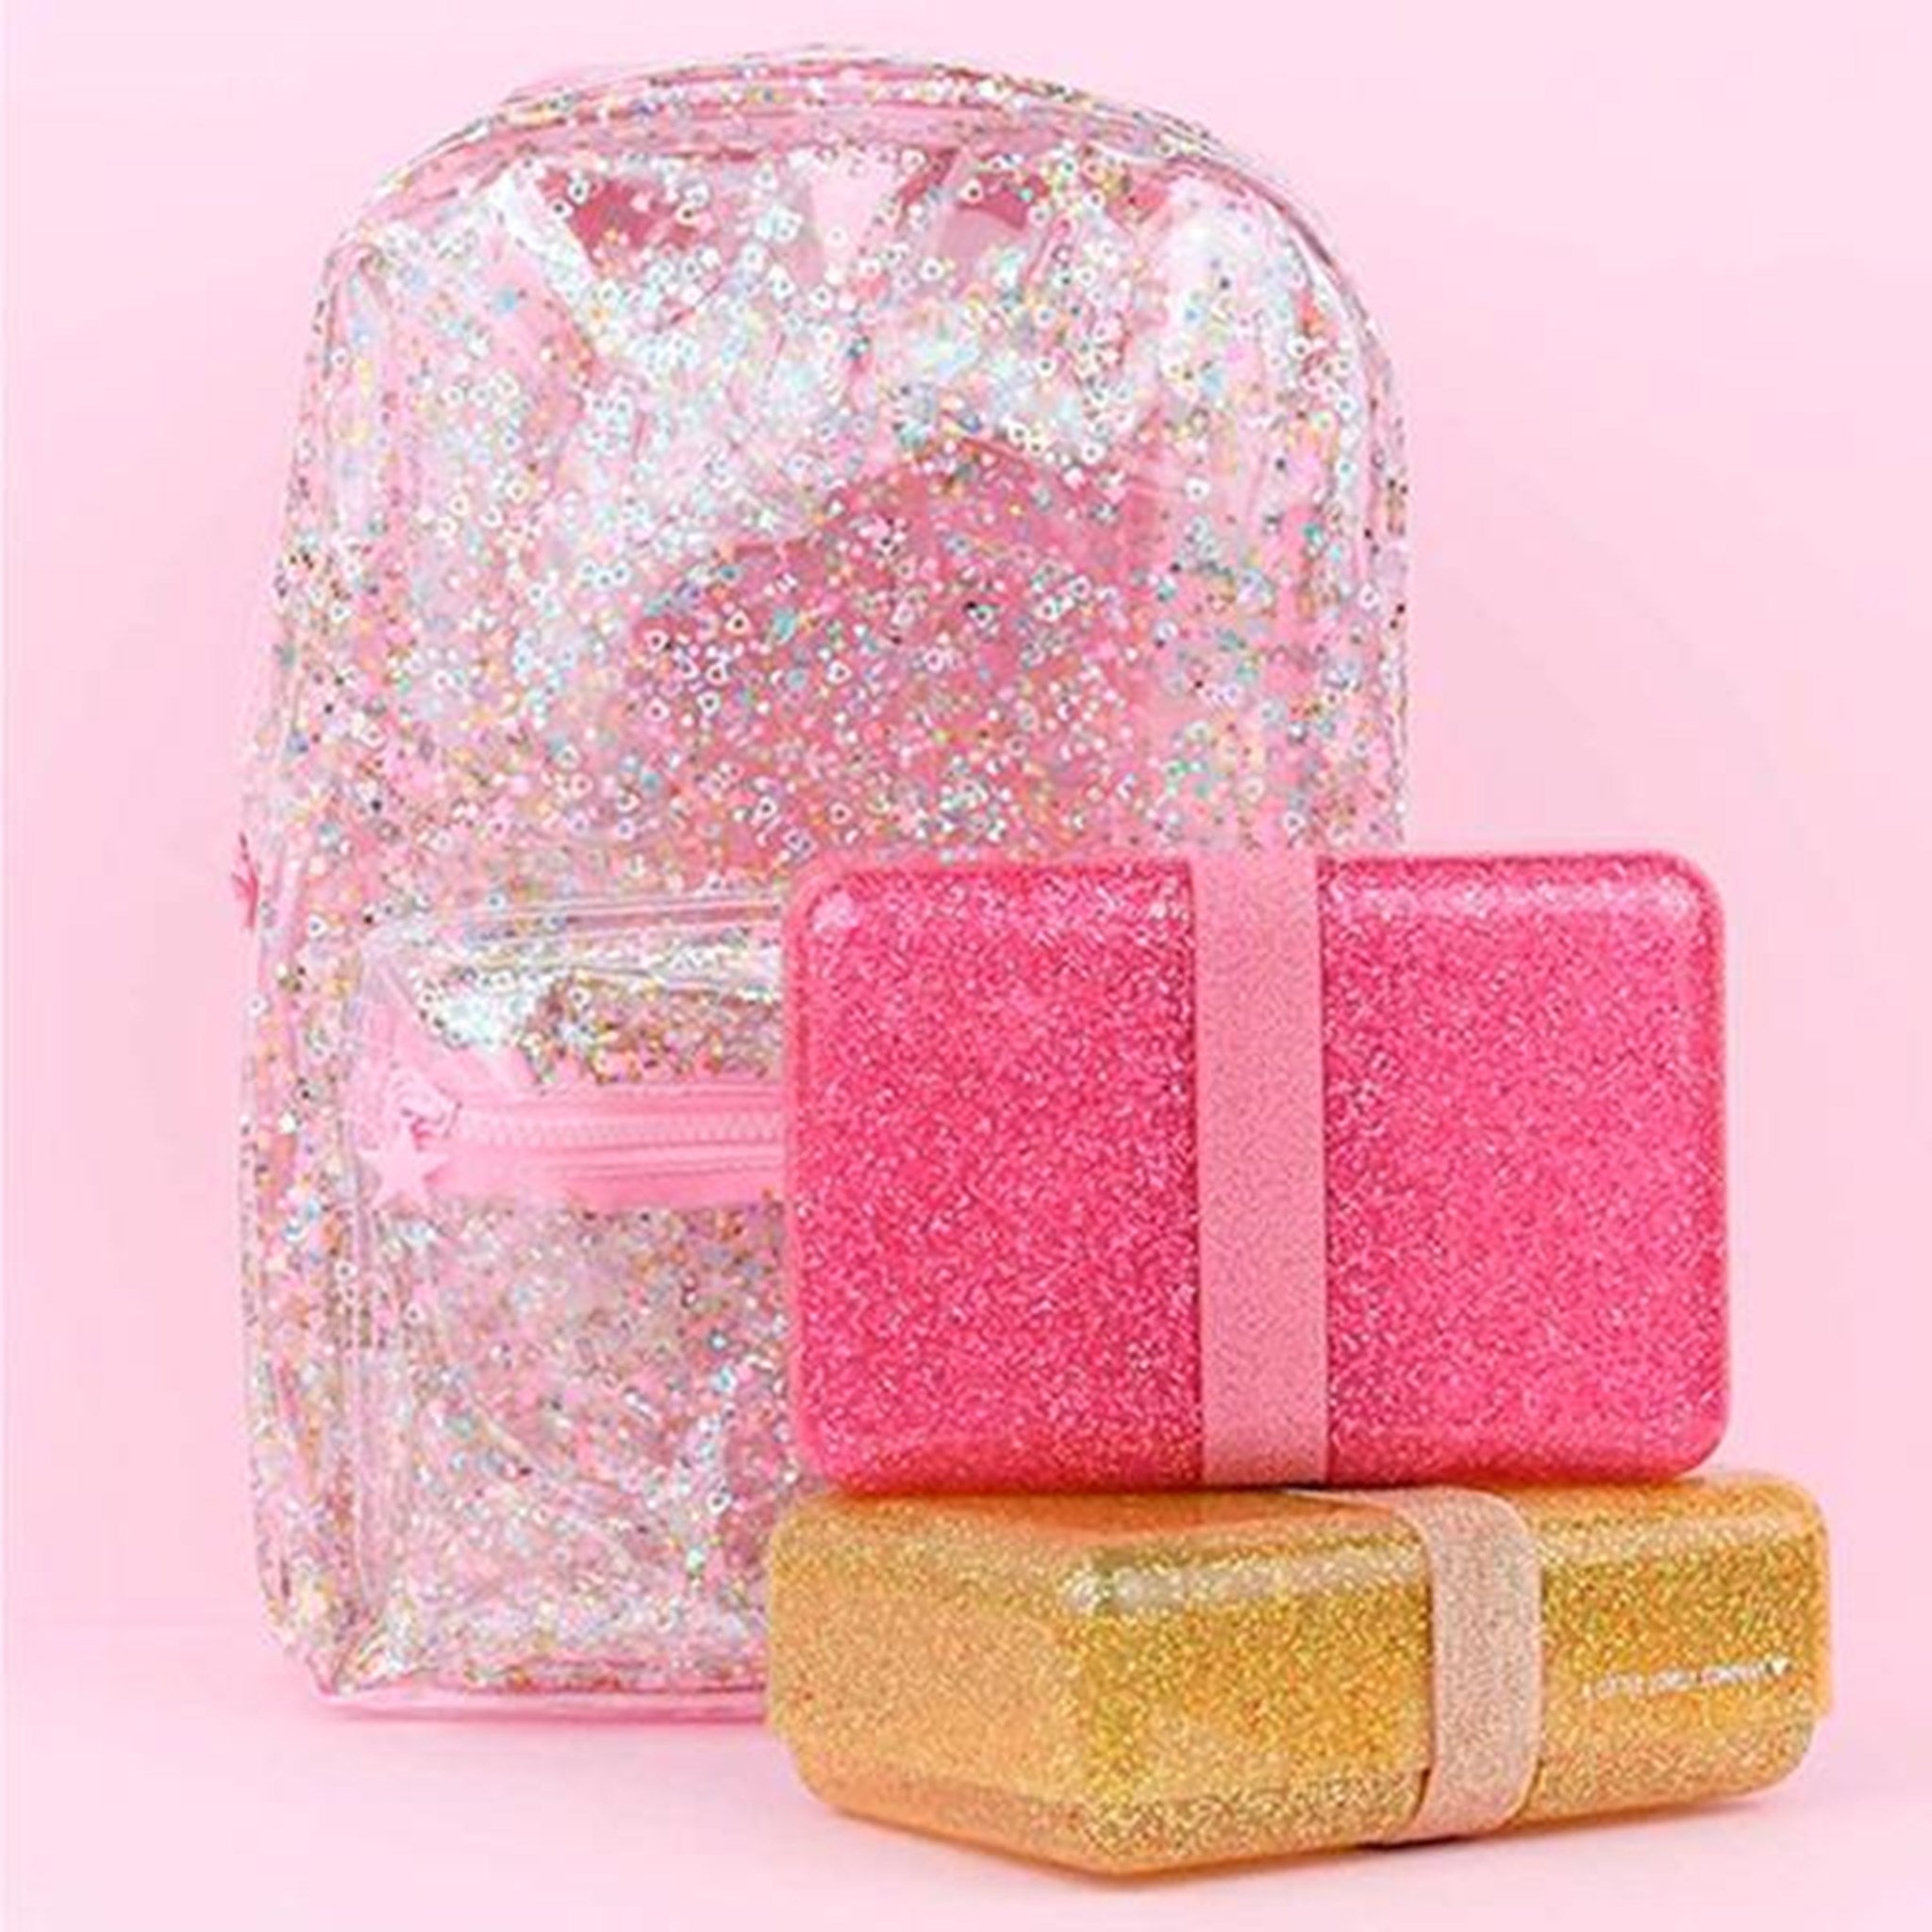 A Little Lovely Company Lunch Box Glitter Pink 2